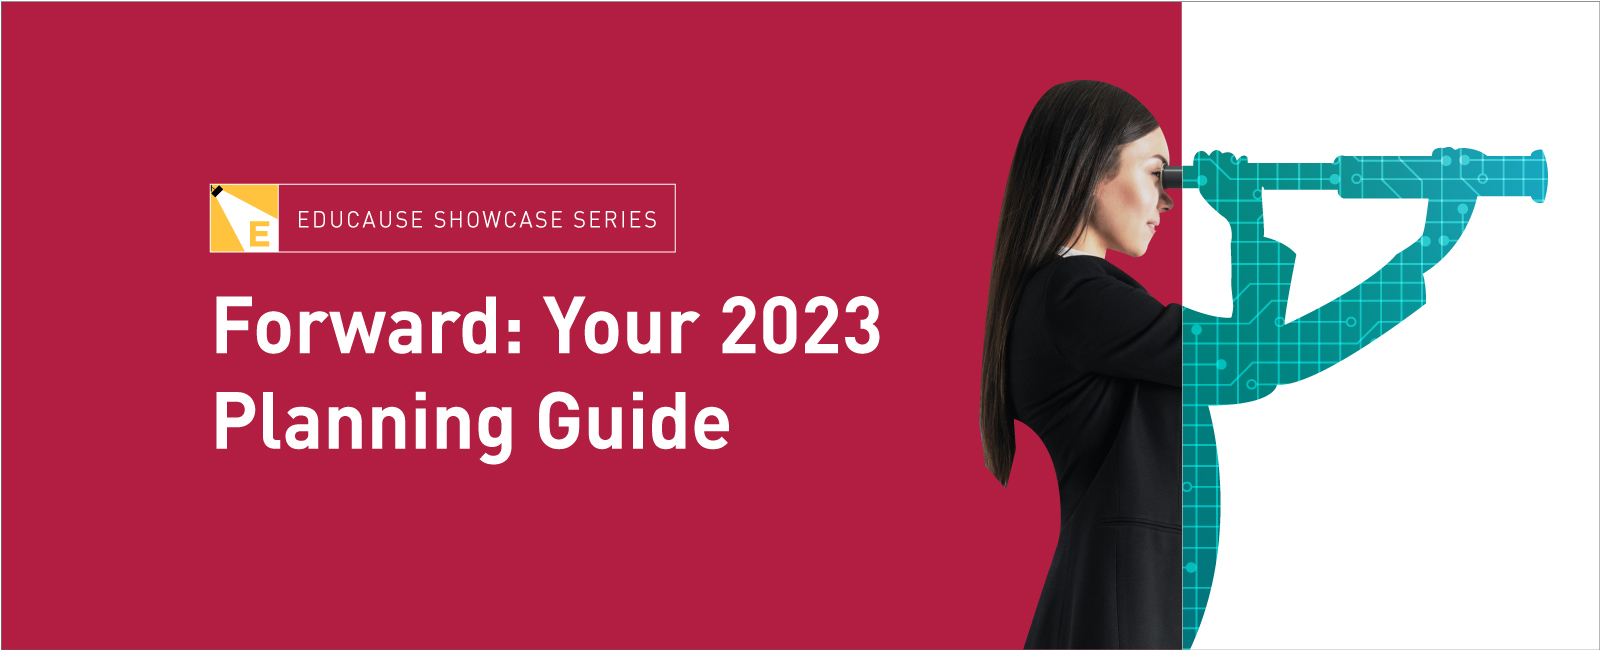 EDUCAUSE Showcase Series | Forward: Your 2023 Planning Guide.